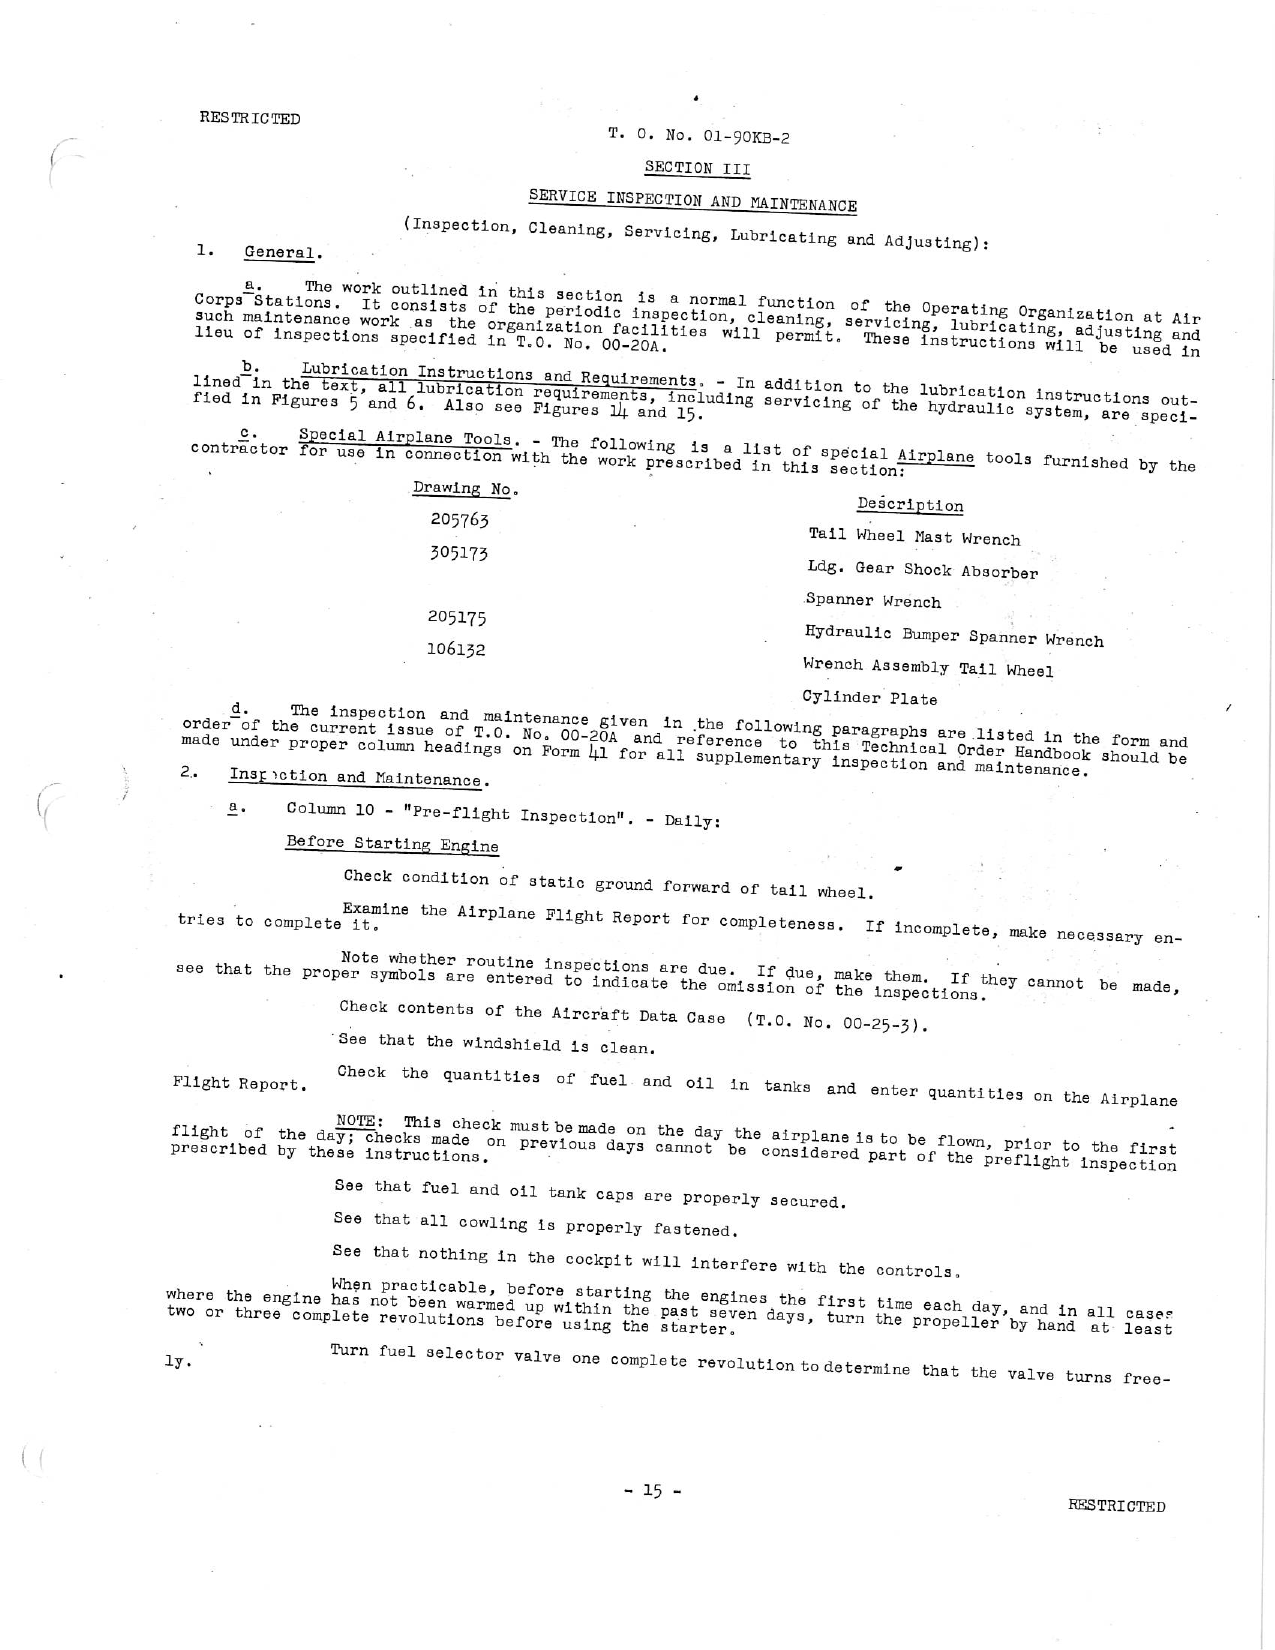 Sample page 3 from AirCorps Library document: Erection and Maintenance Instructions for AT-10